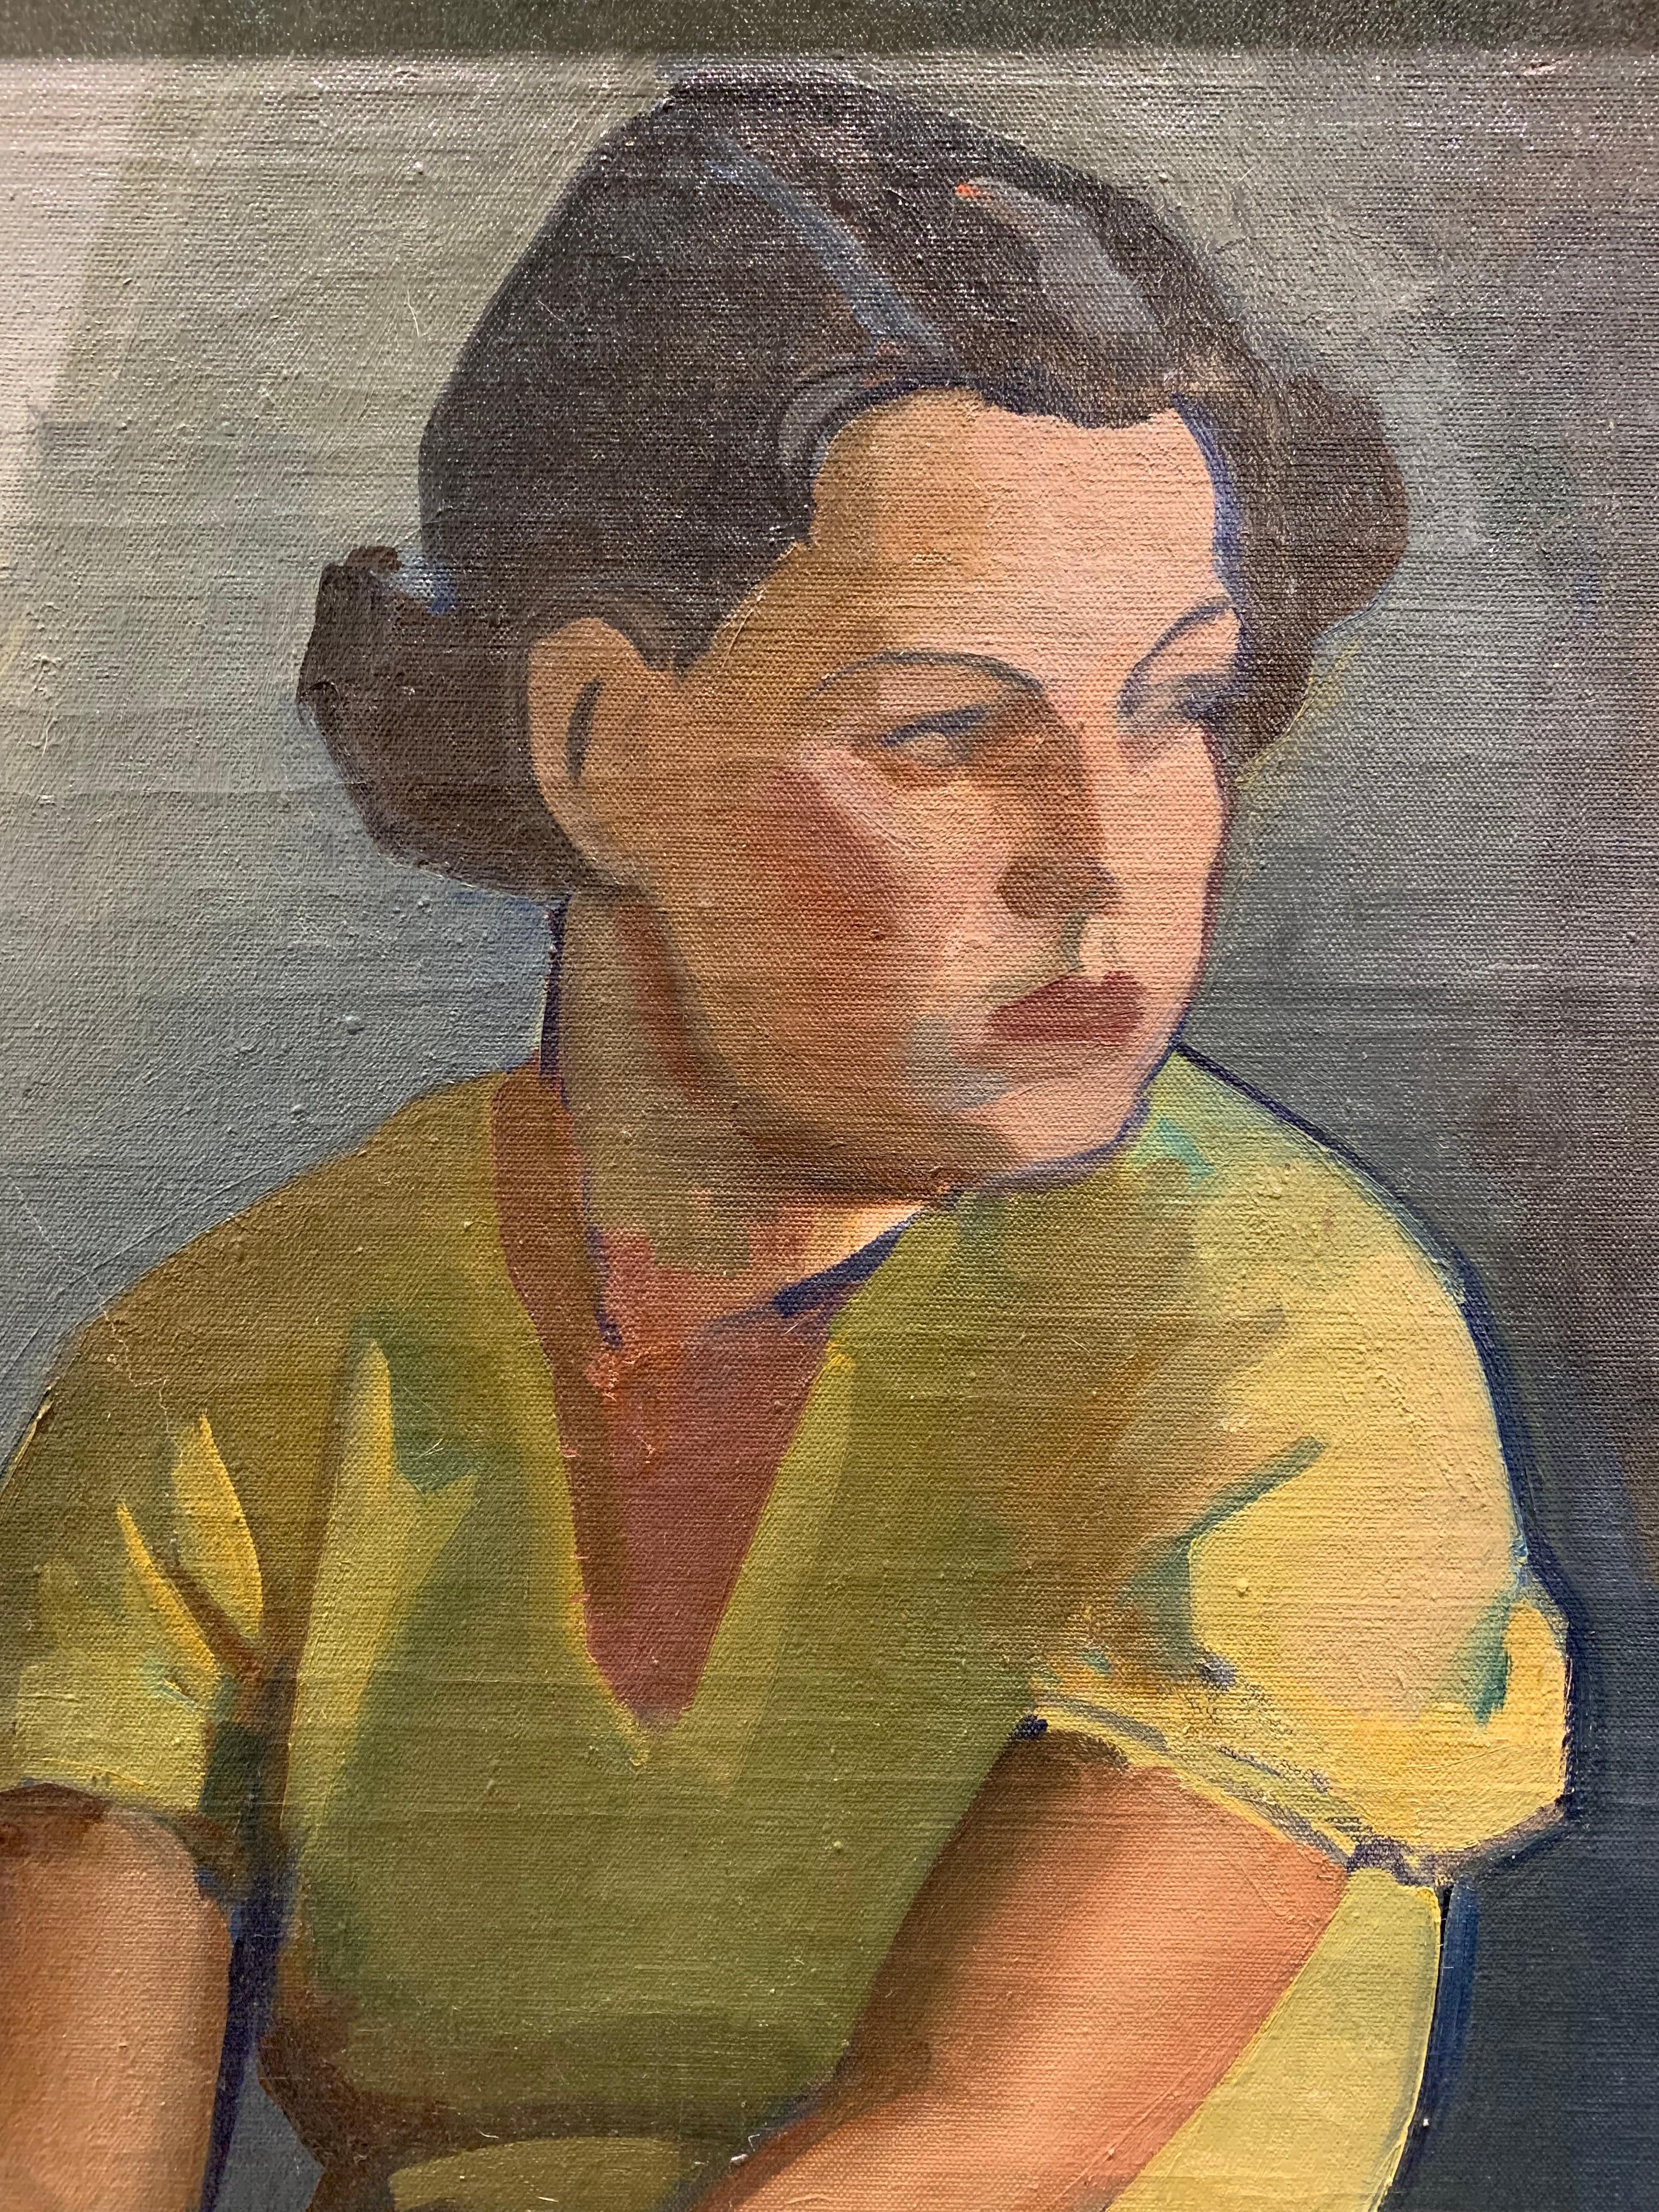 Wood 1930s Finnish 'Young Woman in a Yellow Dress' Oil on Canvas Artist Llmari Aalto For Sale